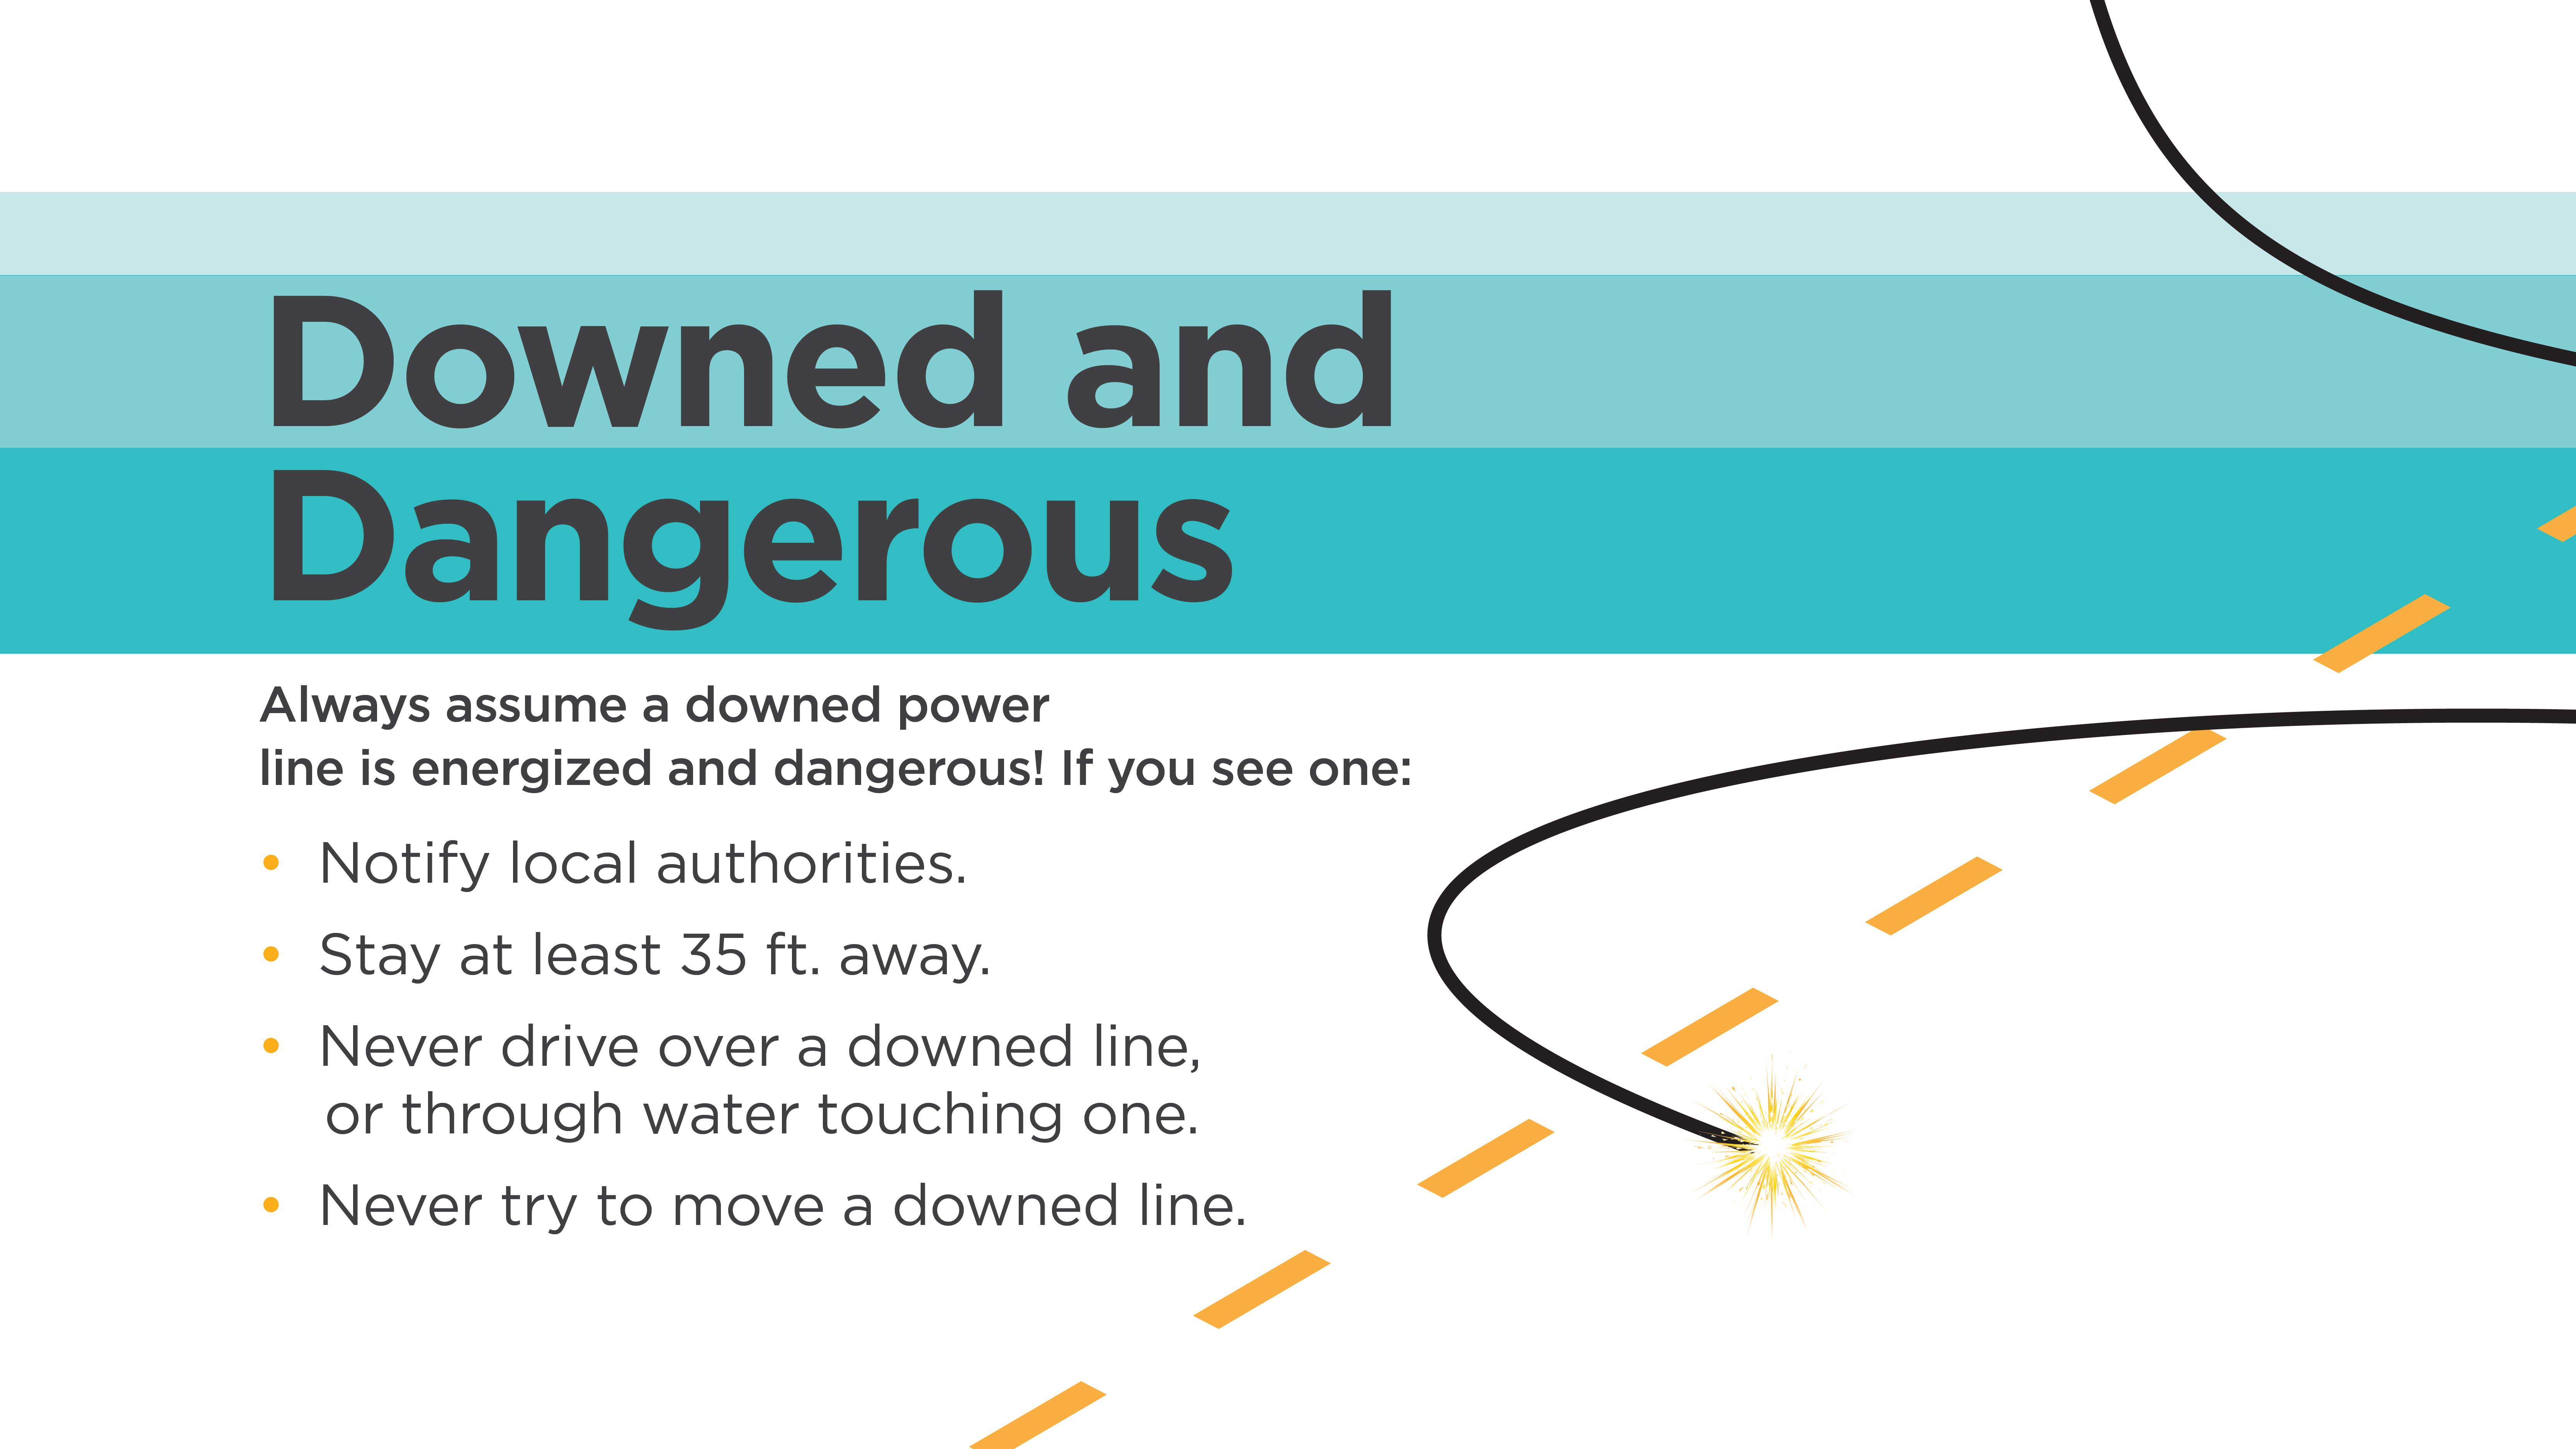 Stay away from downed power lines